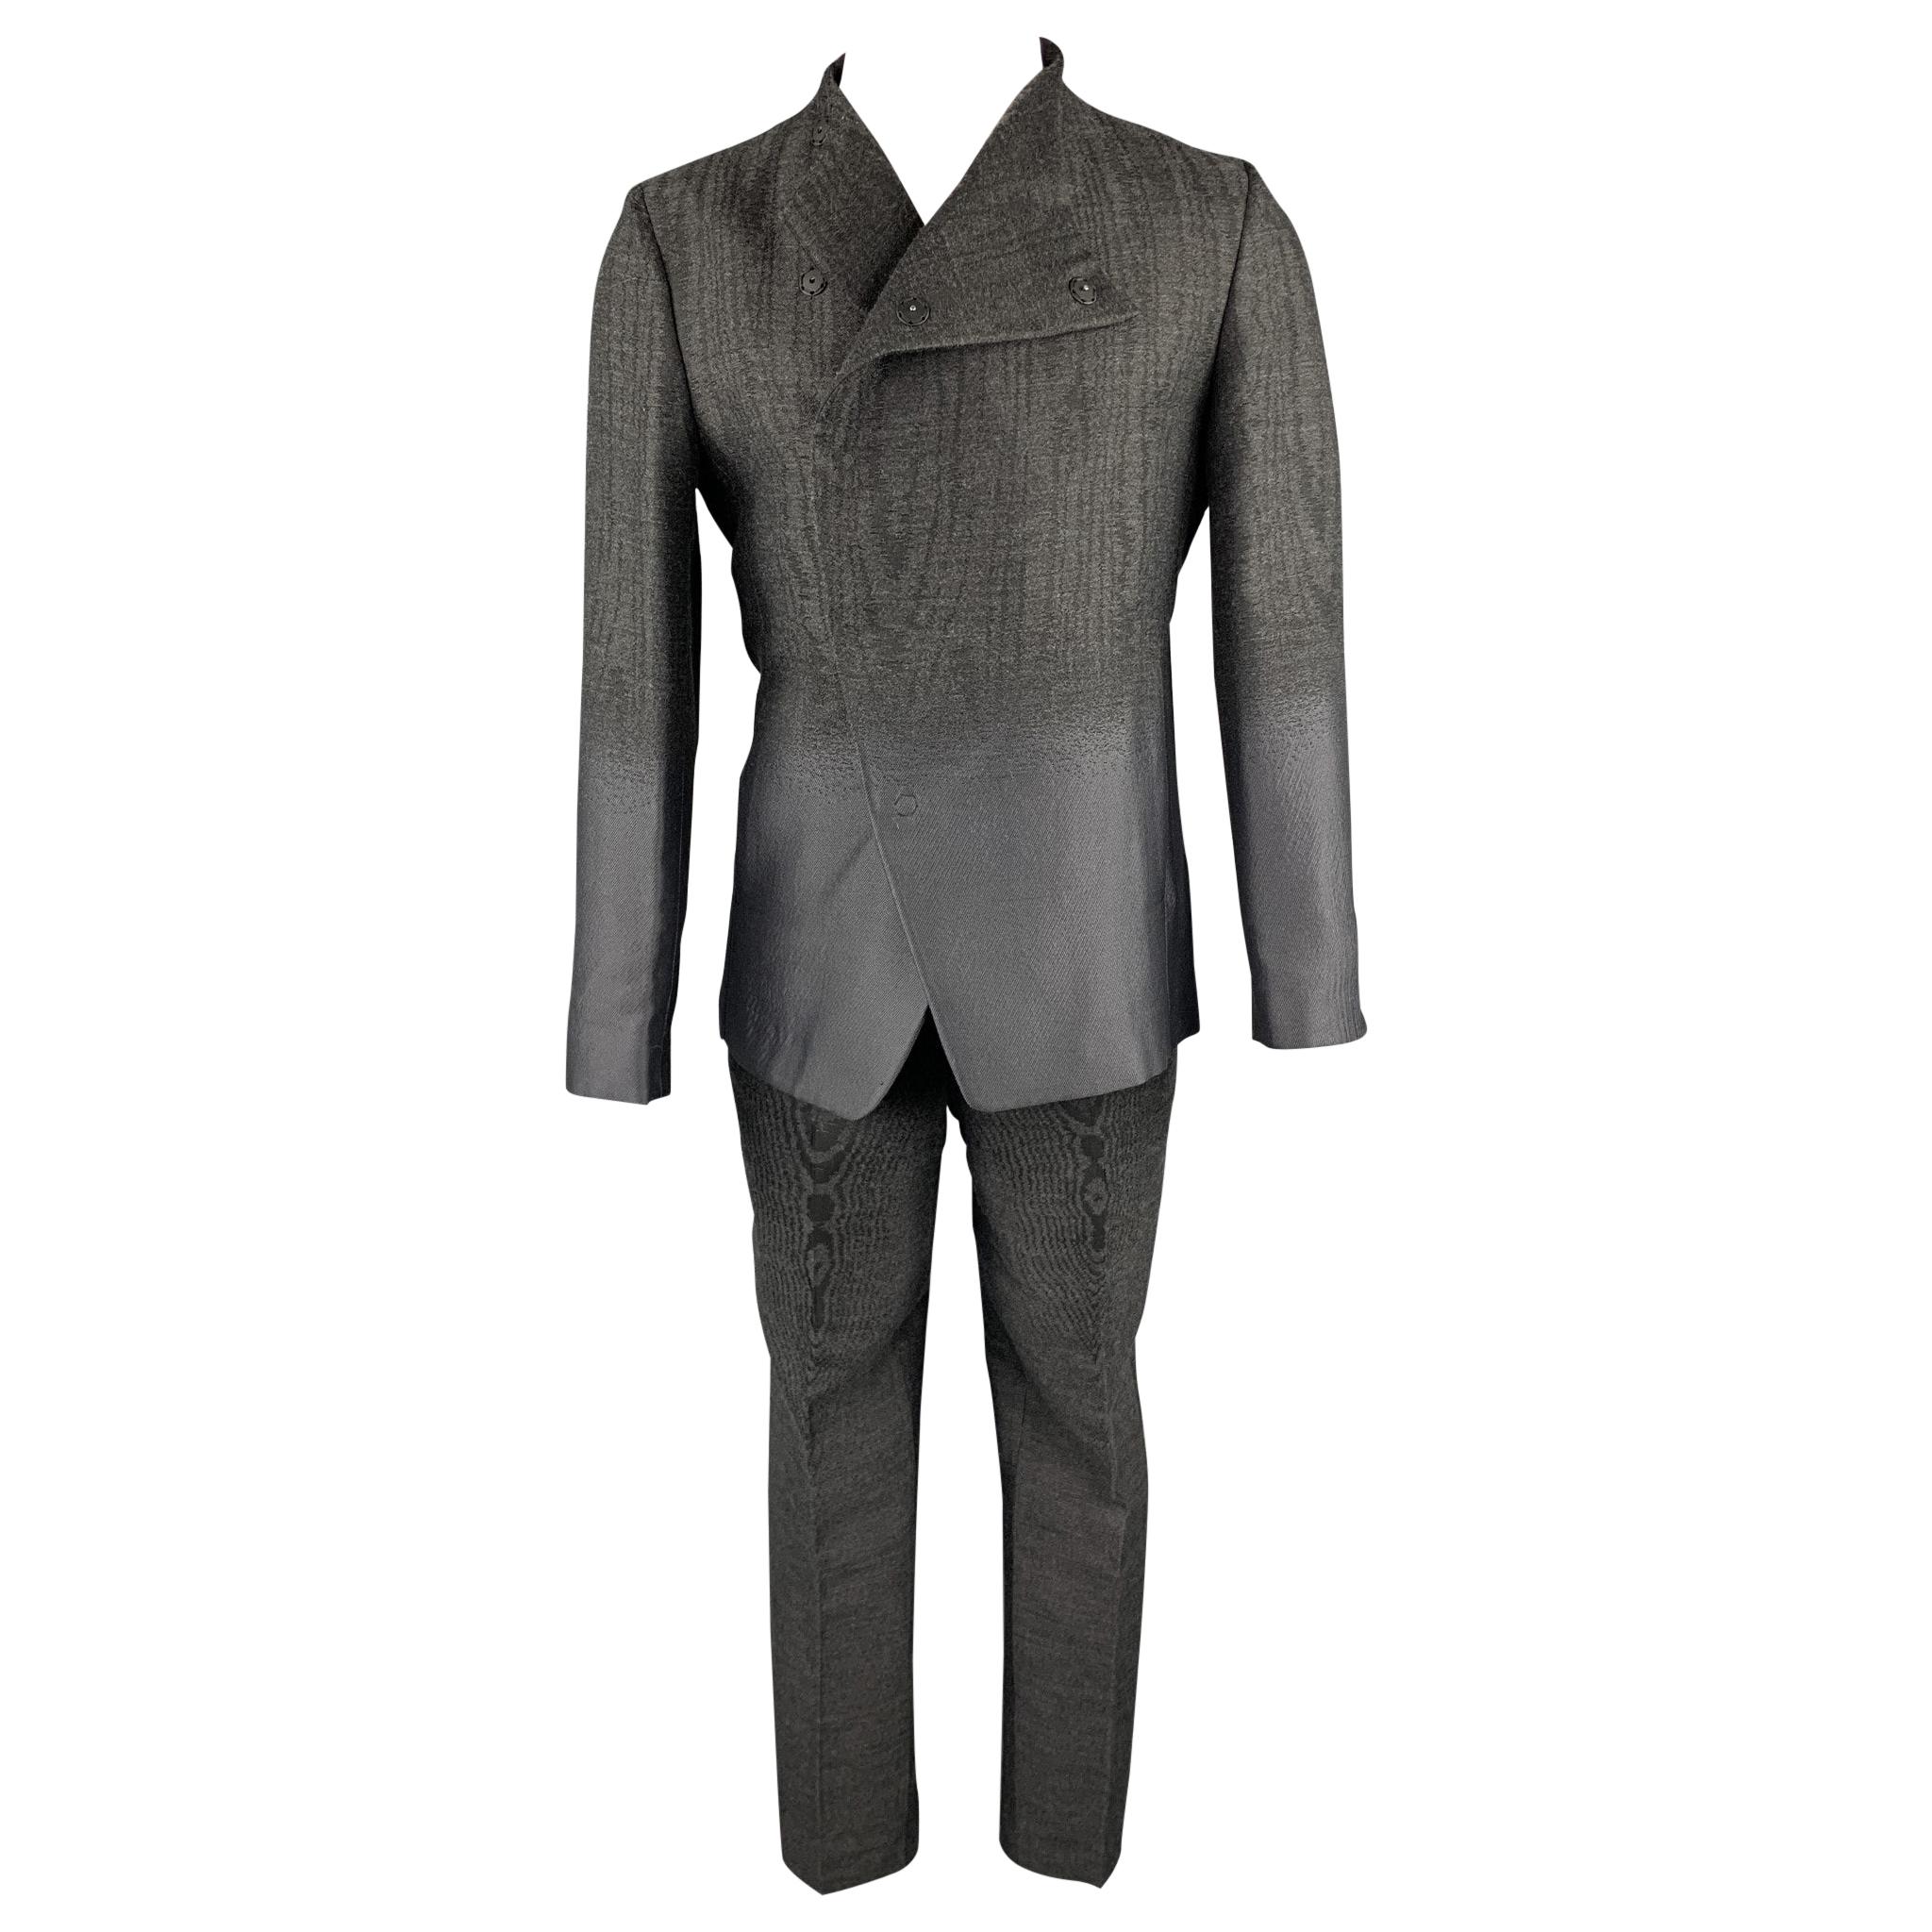 EMPORIO ARMANI Size 38 Charcoal Ombre Polyester Blend Asymmetrical Suit